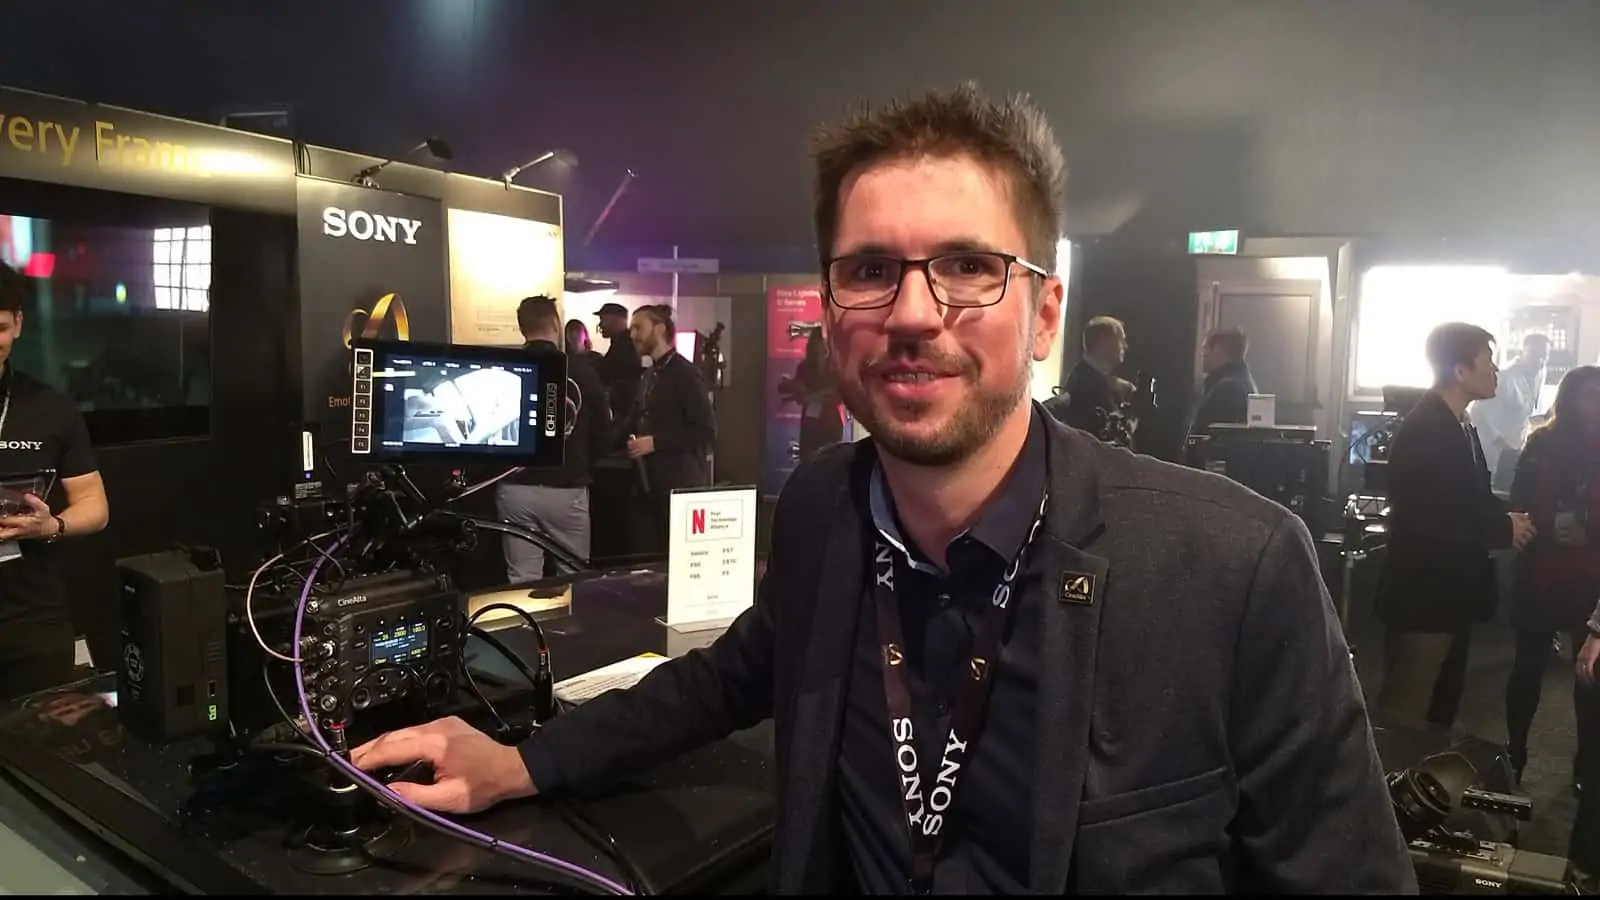 Sebastian Leske, European Product Manager at Sony with the CineAlta